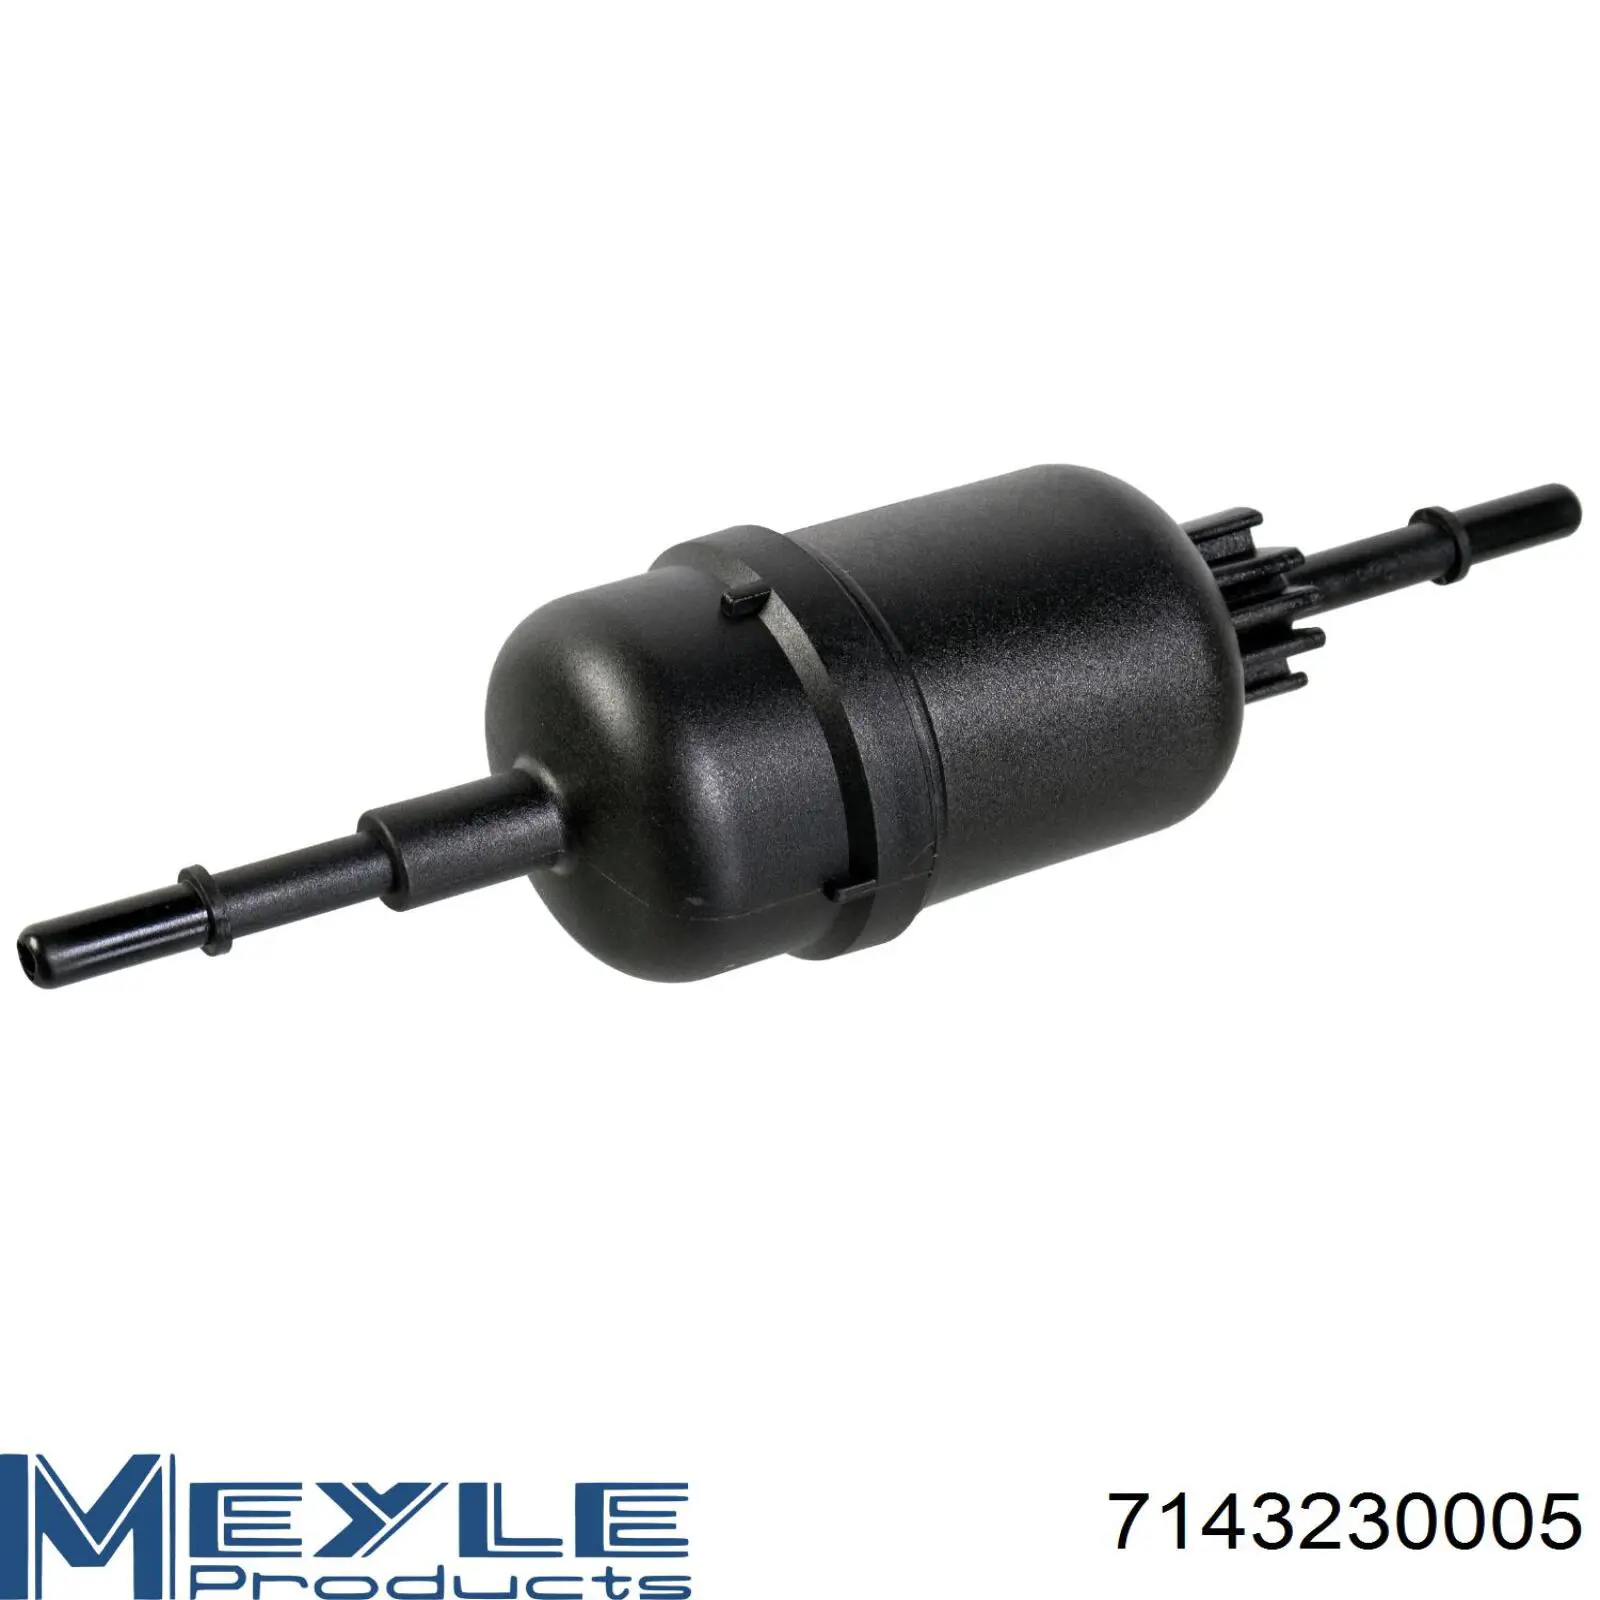 7143230005 Meyle filtro combustible